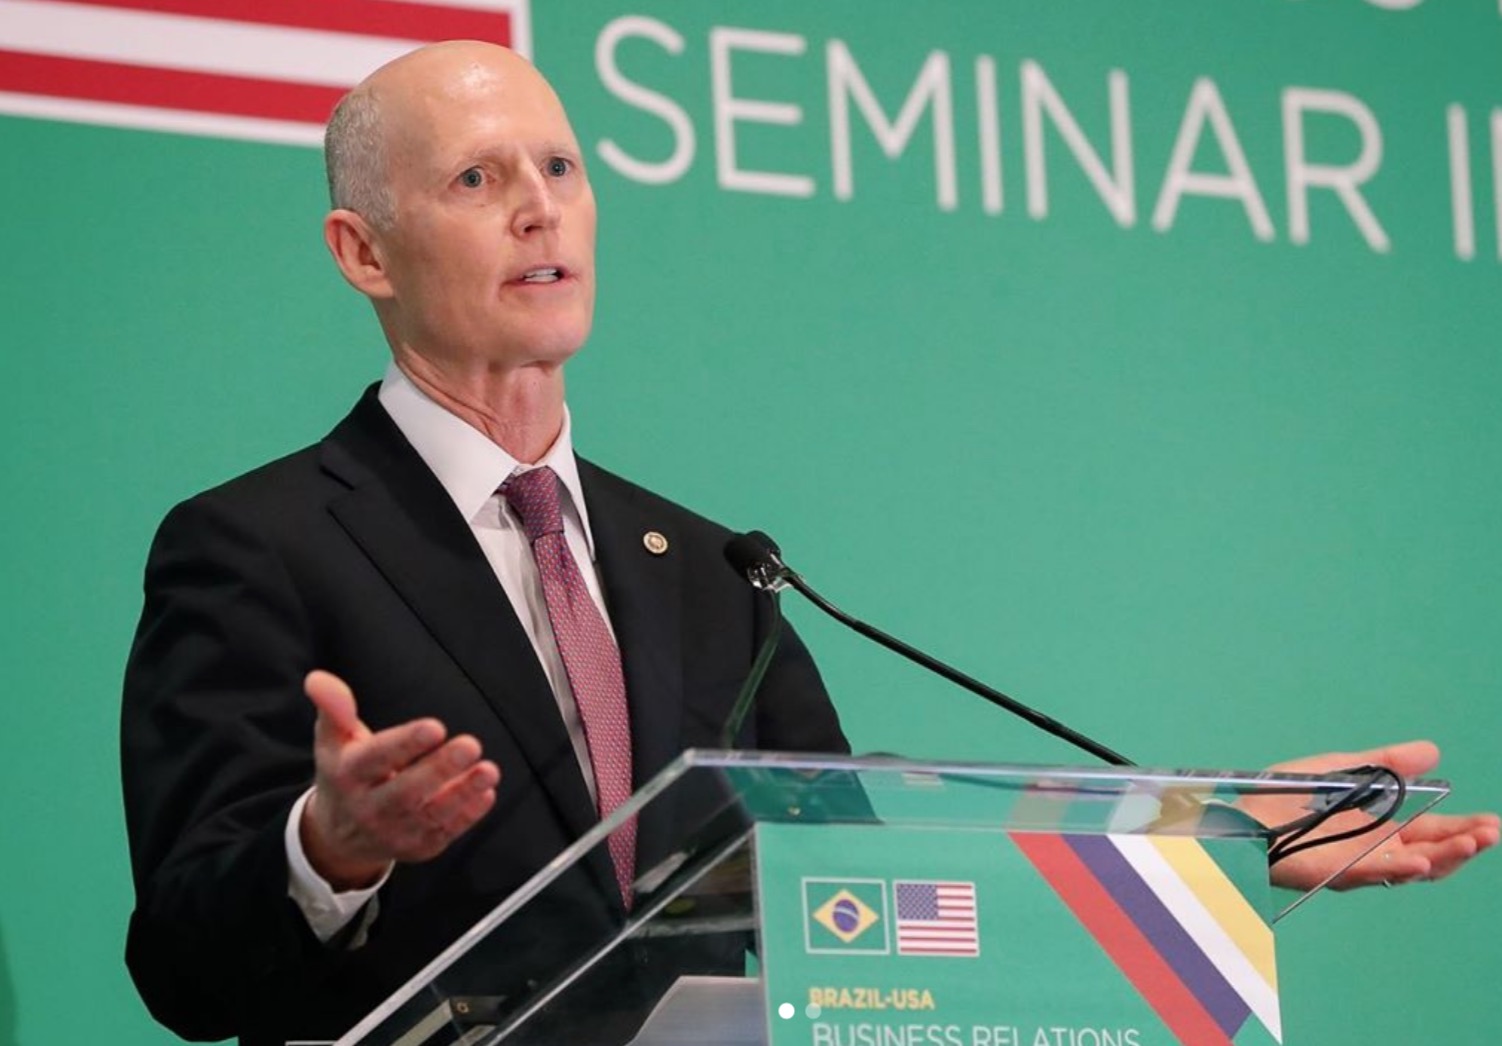 Rick Scott's Worldwide Call to Arms Against Communist China